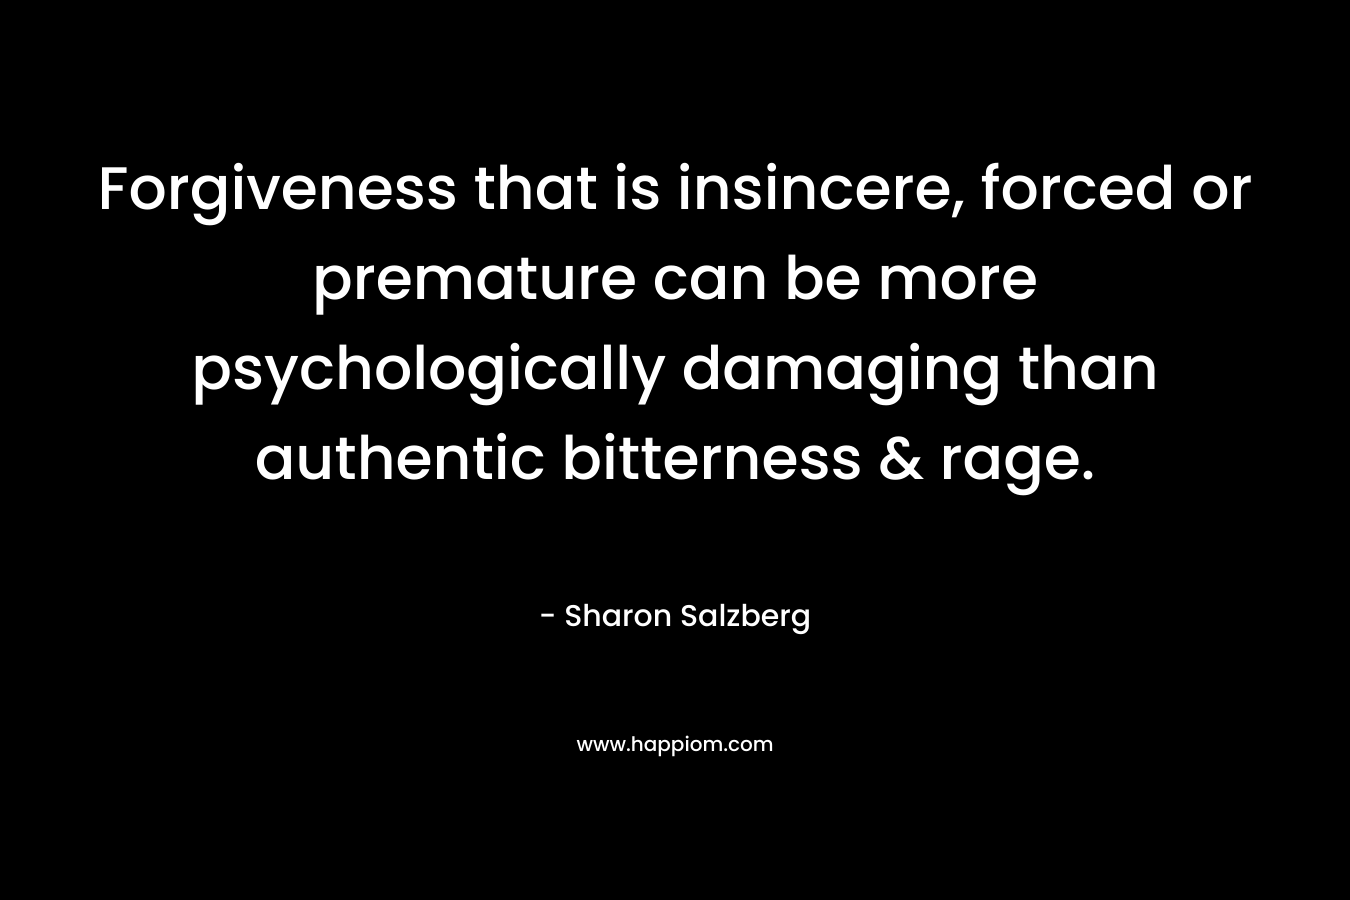 Forgiveness that is insincere, forced or premature can be more psychologically damaging than authentic bitterness & rage. – Sharon Salzberg